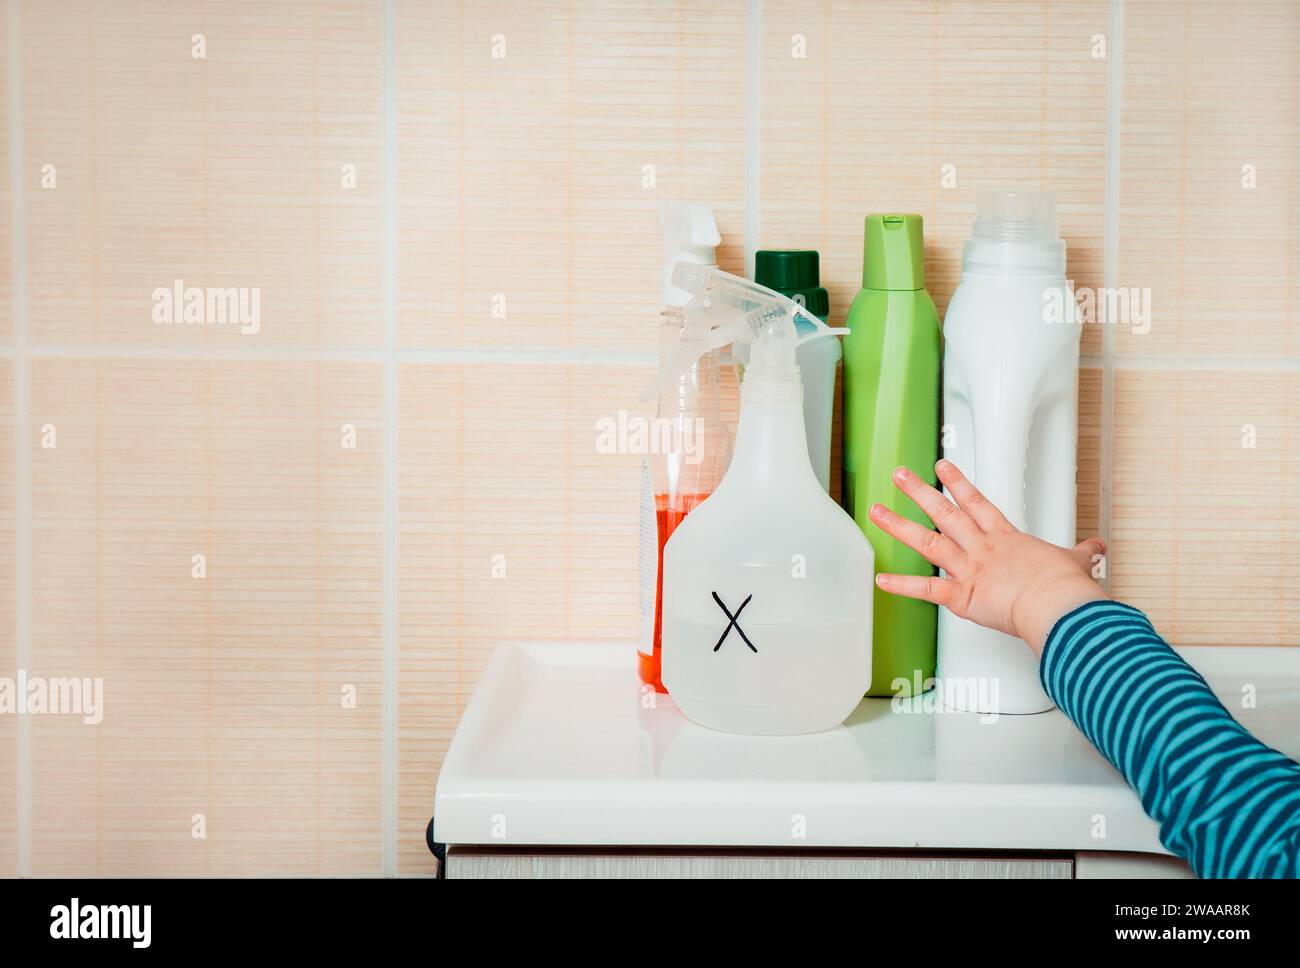 Little child reaches out to household chemicals. Keep away from children. Dangers at home for kids. Stock Photo